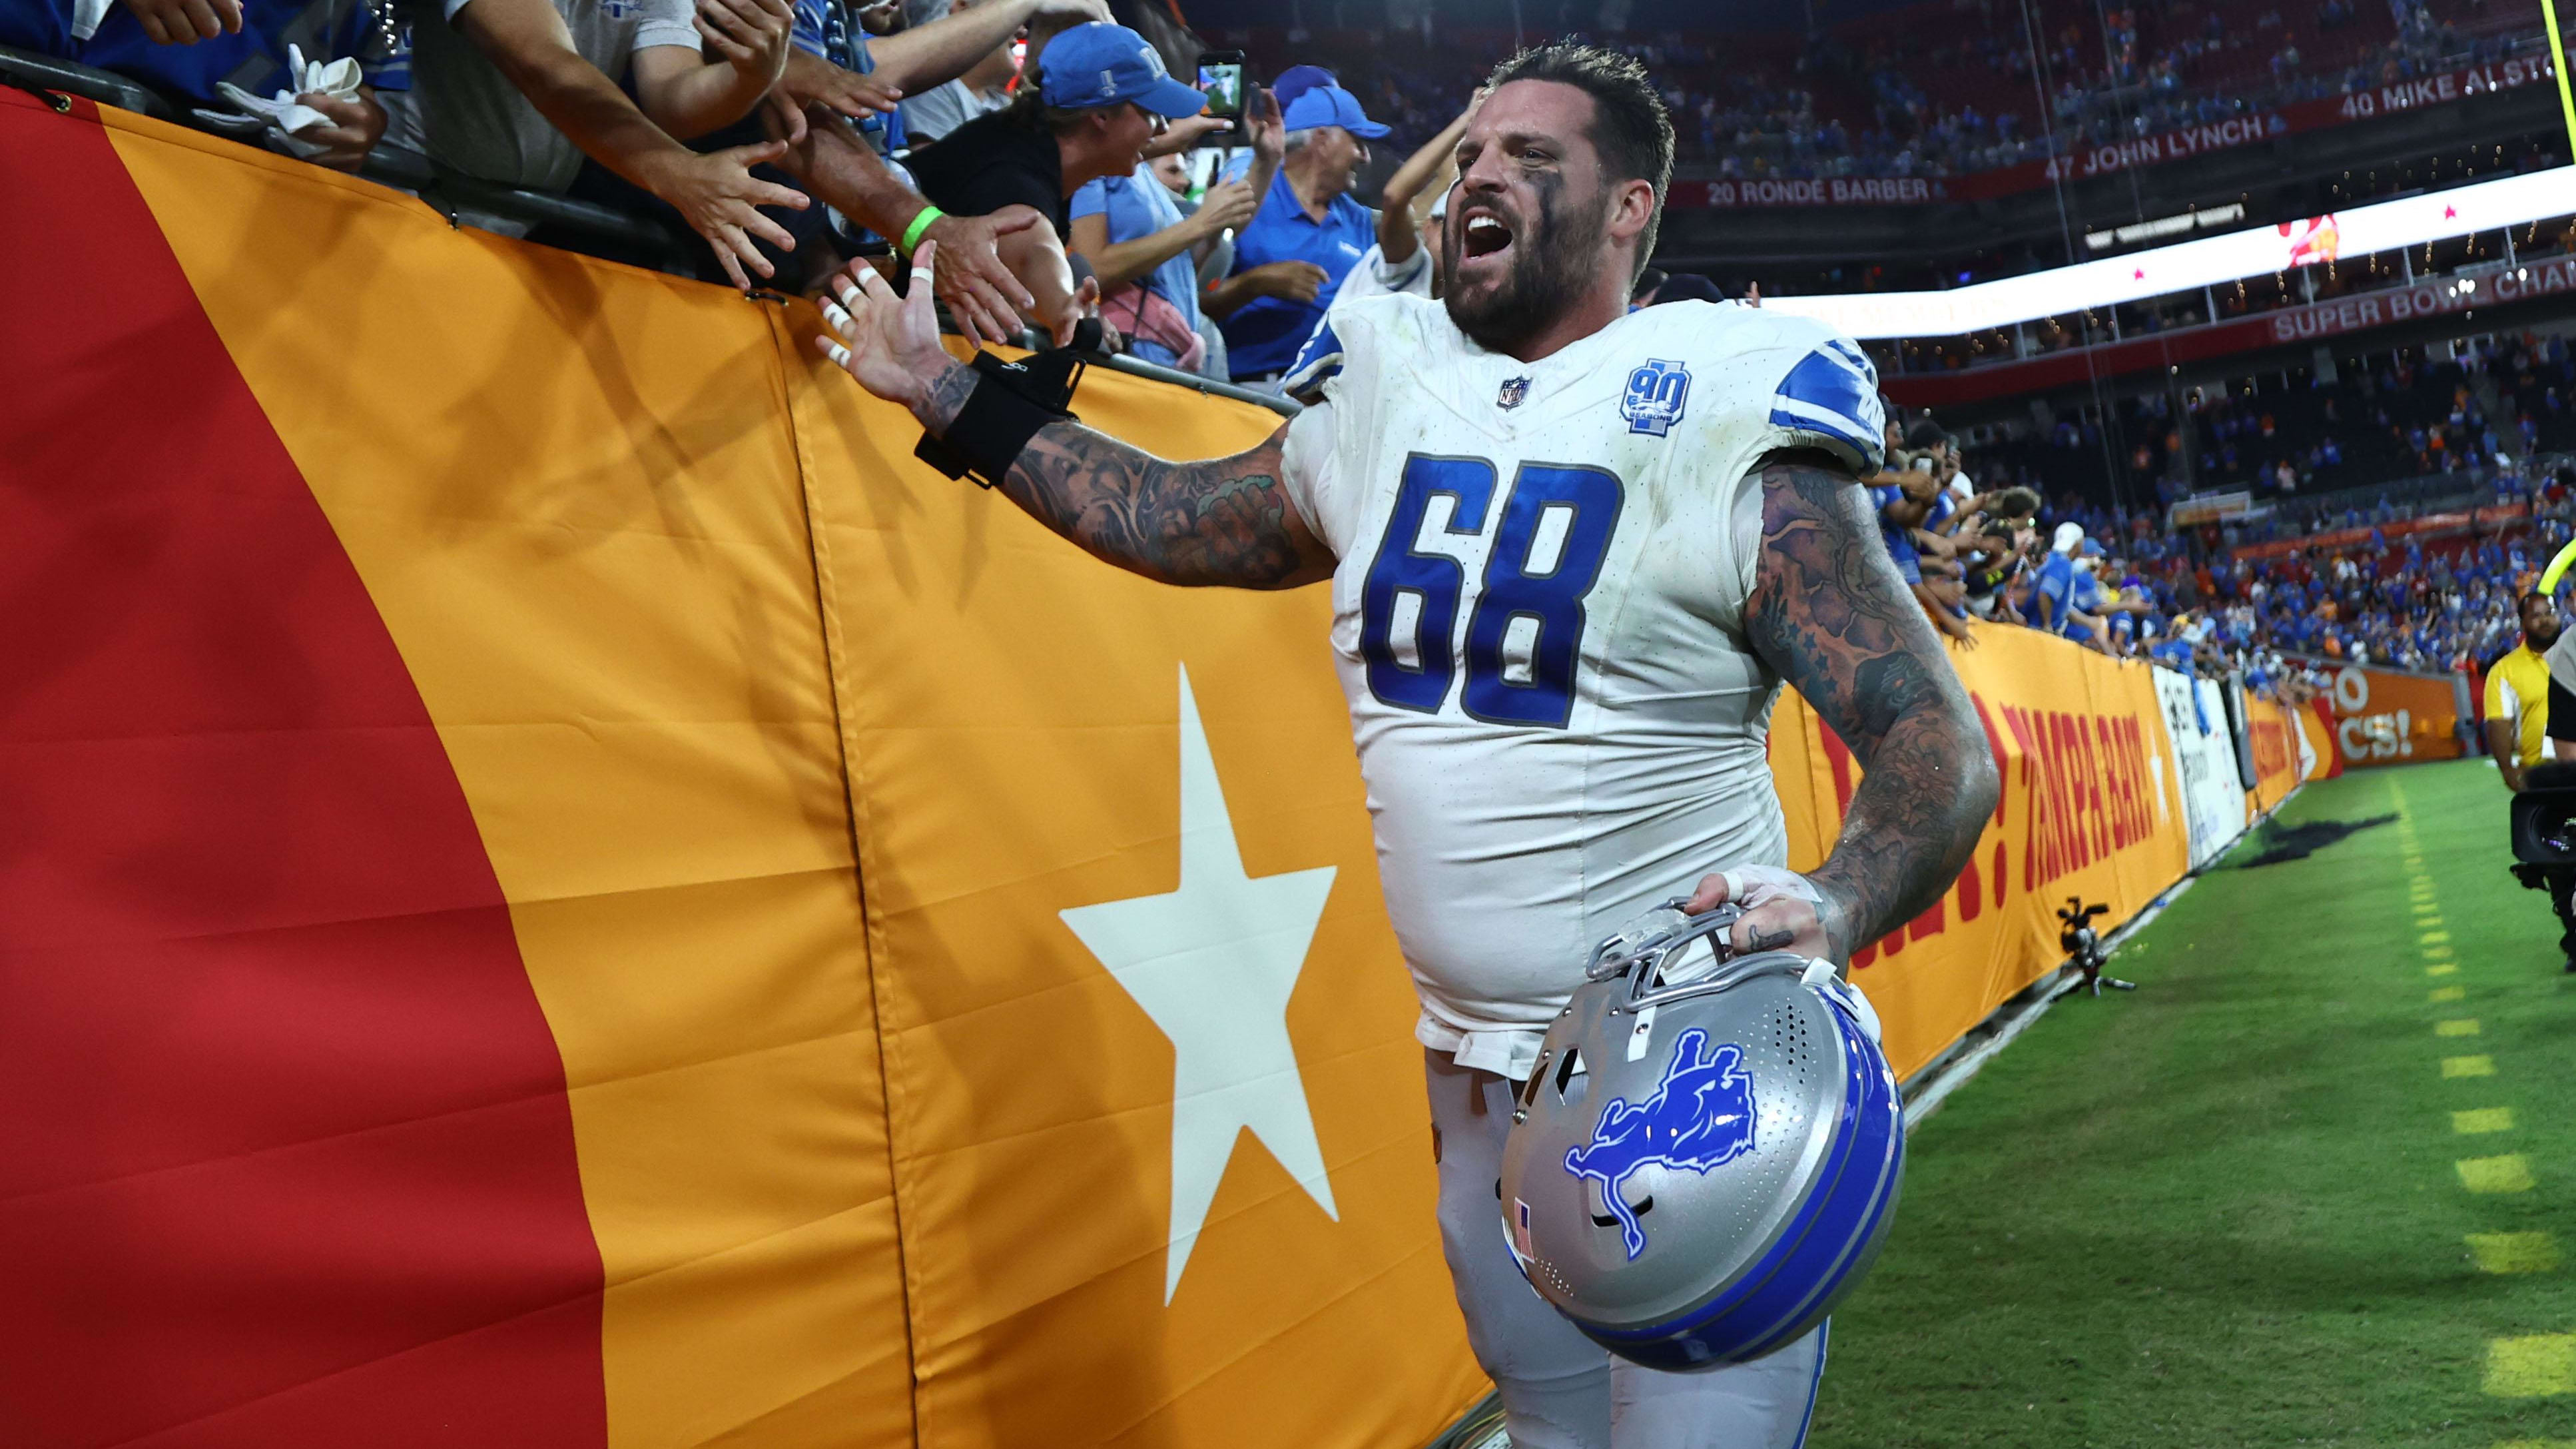 Detroit Lions offensive tackle Taylor Decker (68) celebrates with fans after beating the Tampa Bay Buccaneers.